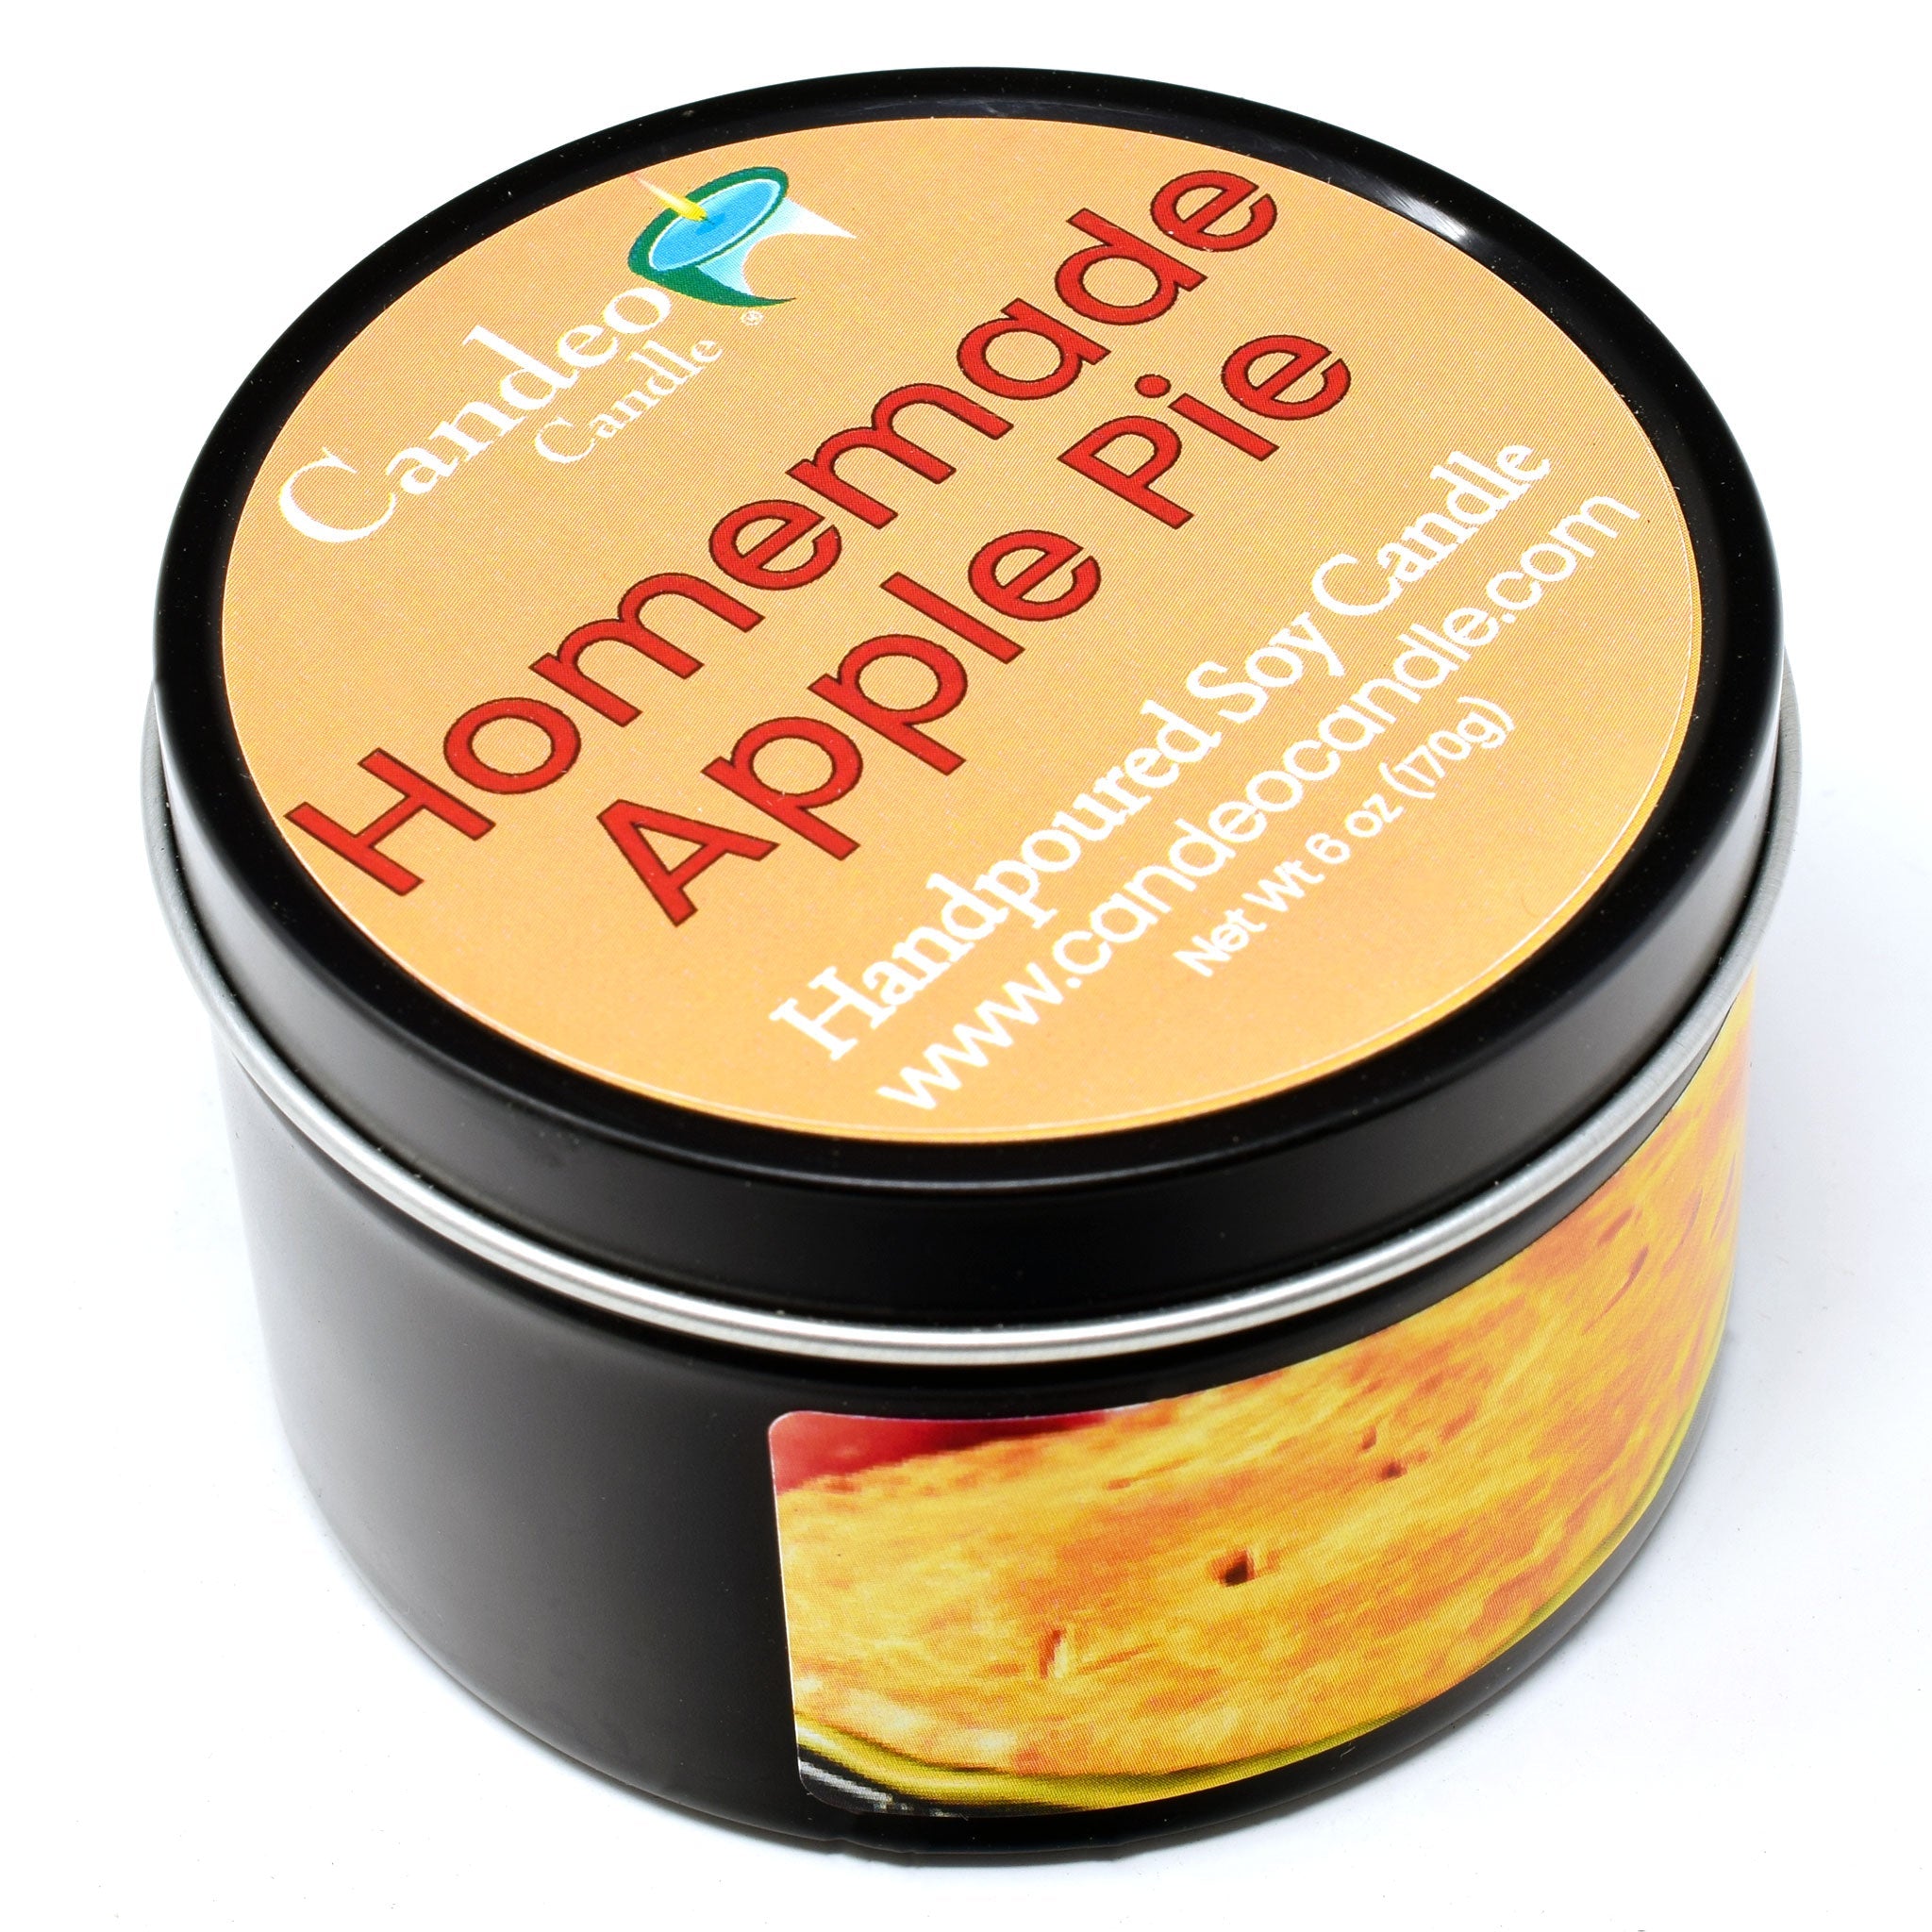 Homemade Apple Pie, 6oz Soy Candle Tin - Candeo Candle